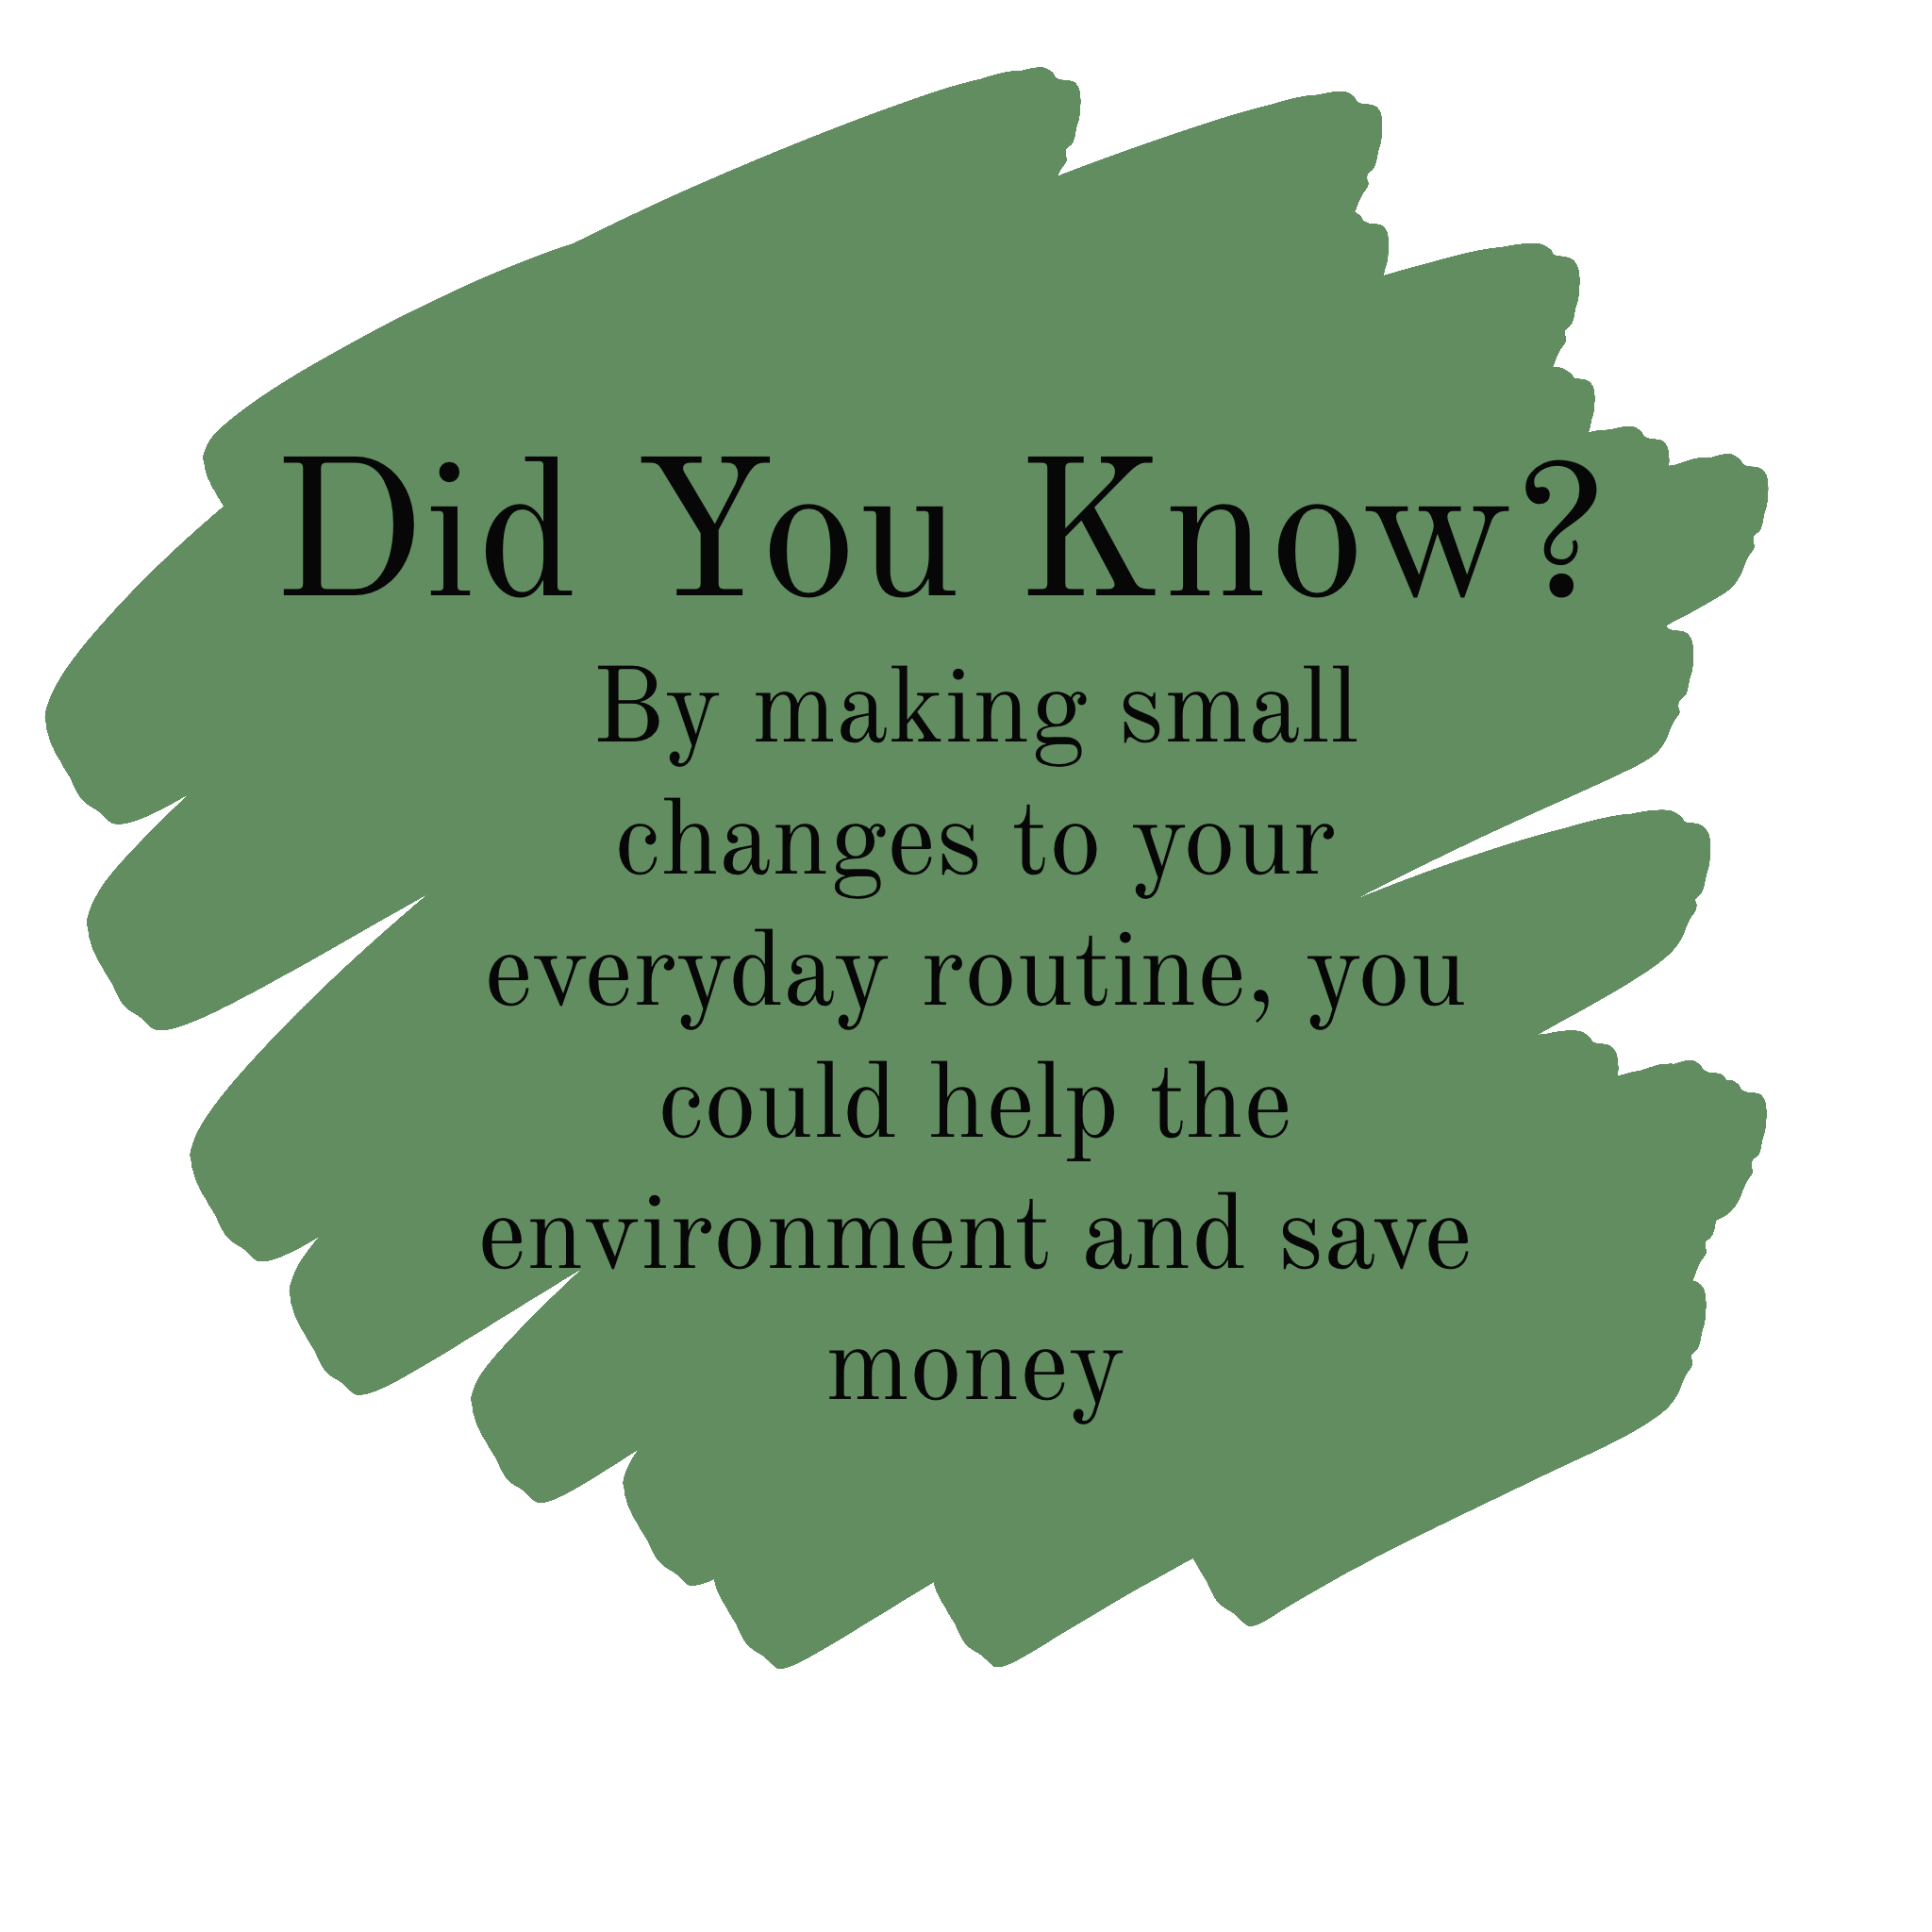 Did You Know? By making small changes to your everyday routine, you could help the environment and save money